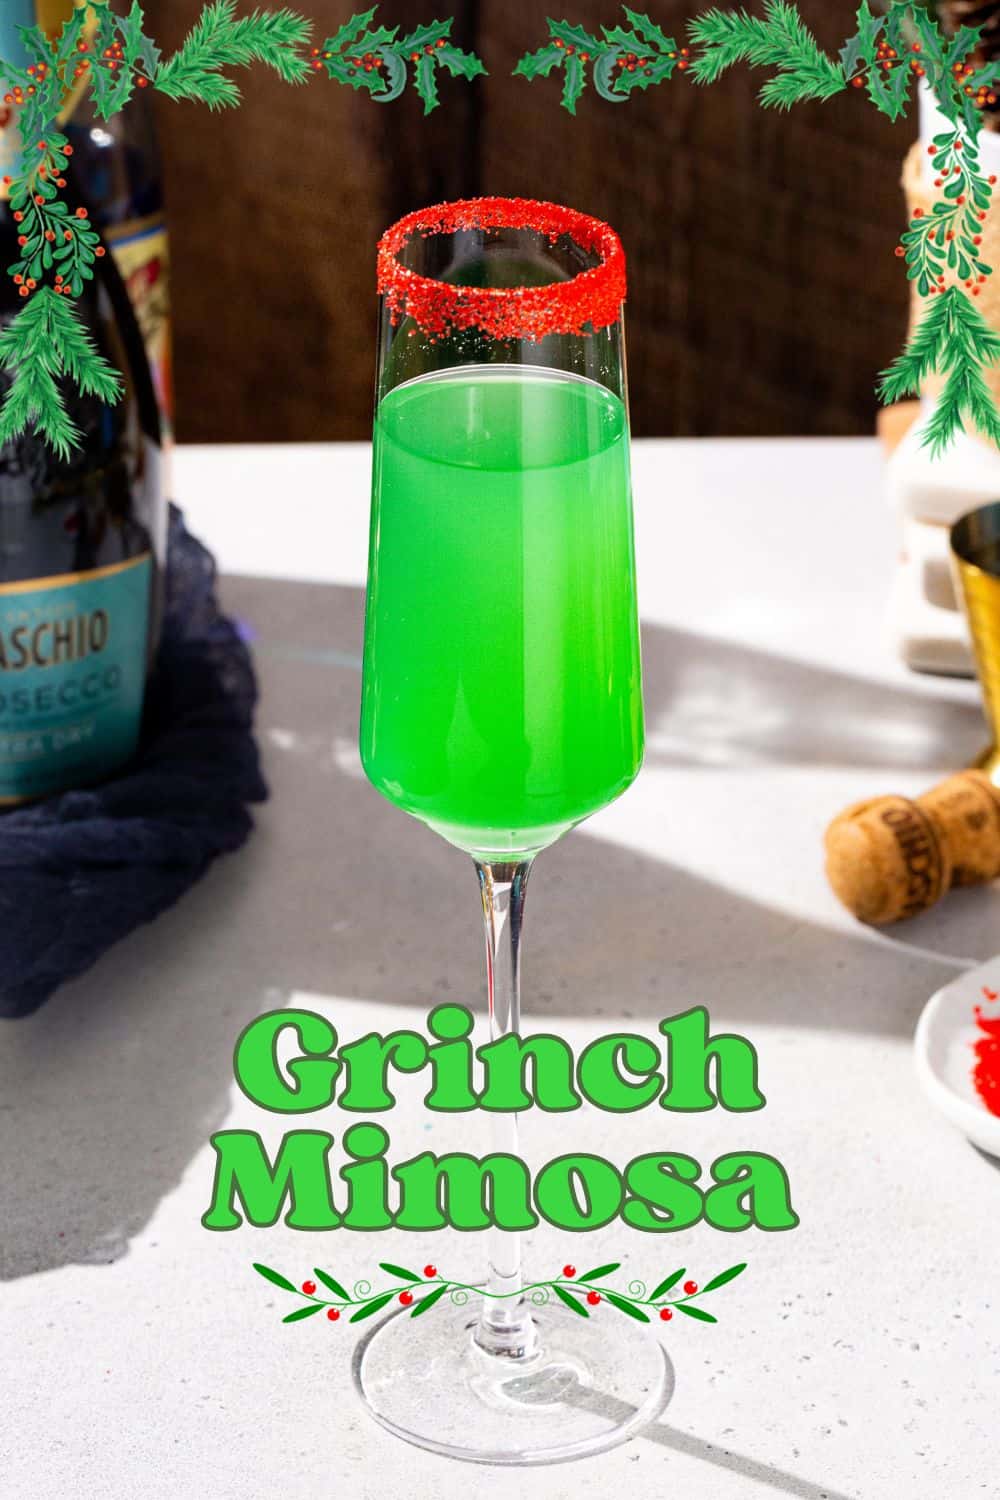 Grinch Mimosa on a countertop. The drink is bright green with red sugar around the rim. In the background is a bottle of Prosecco and a dish of red sugar. Bright green overlay text under the drink says “Grinch Mimosa”.